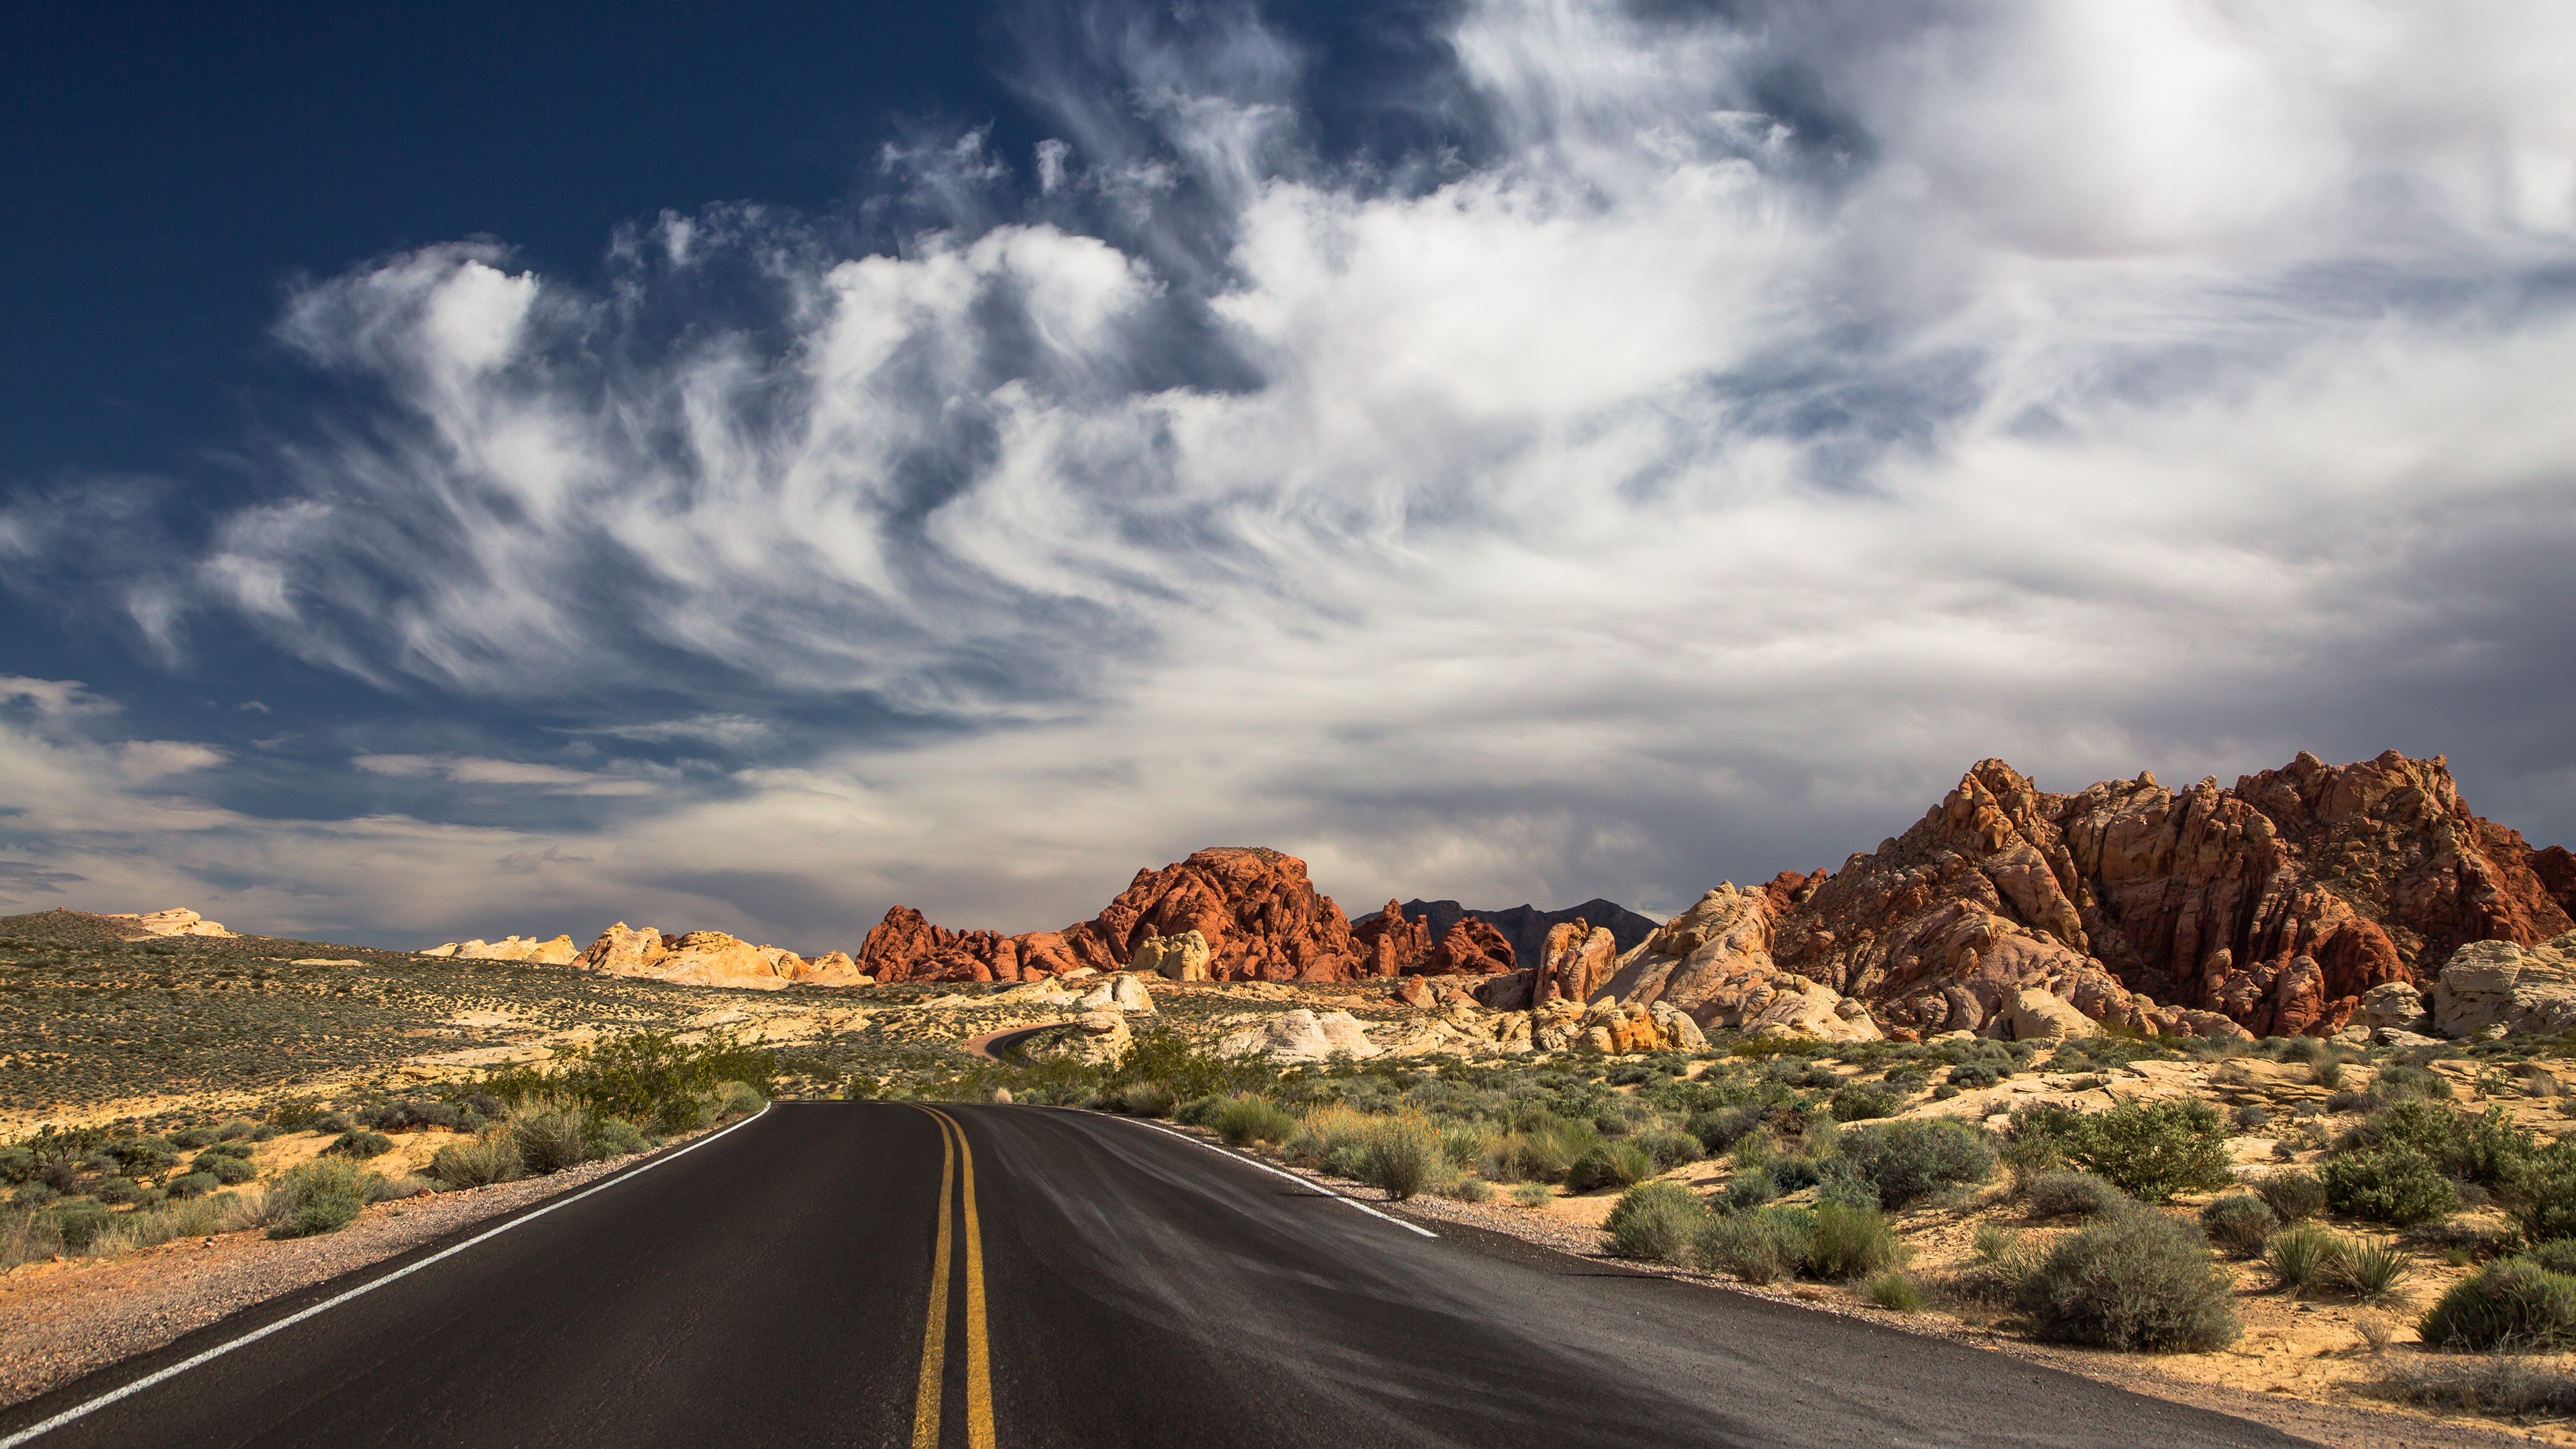 Wallpapers ID: 38550 / Las Vegas, 4k, HD wallpaper, 4K, the Valley of Fire State Park, road, clouds, mountain, valley, day, sky